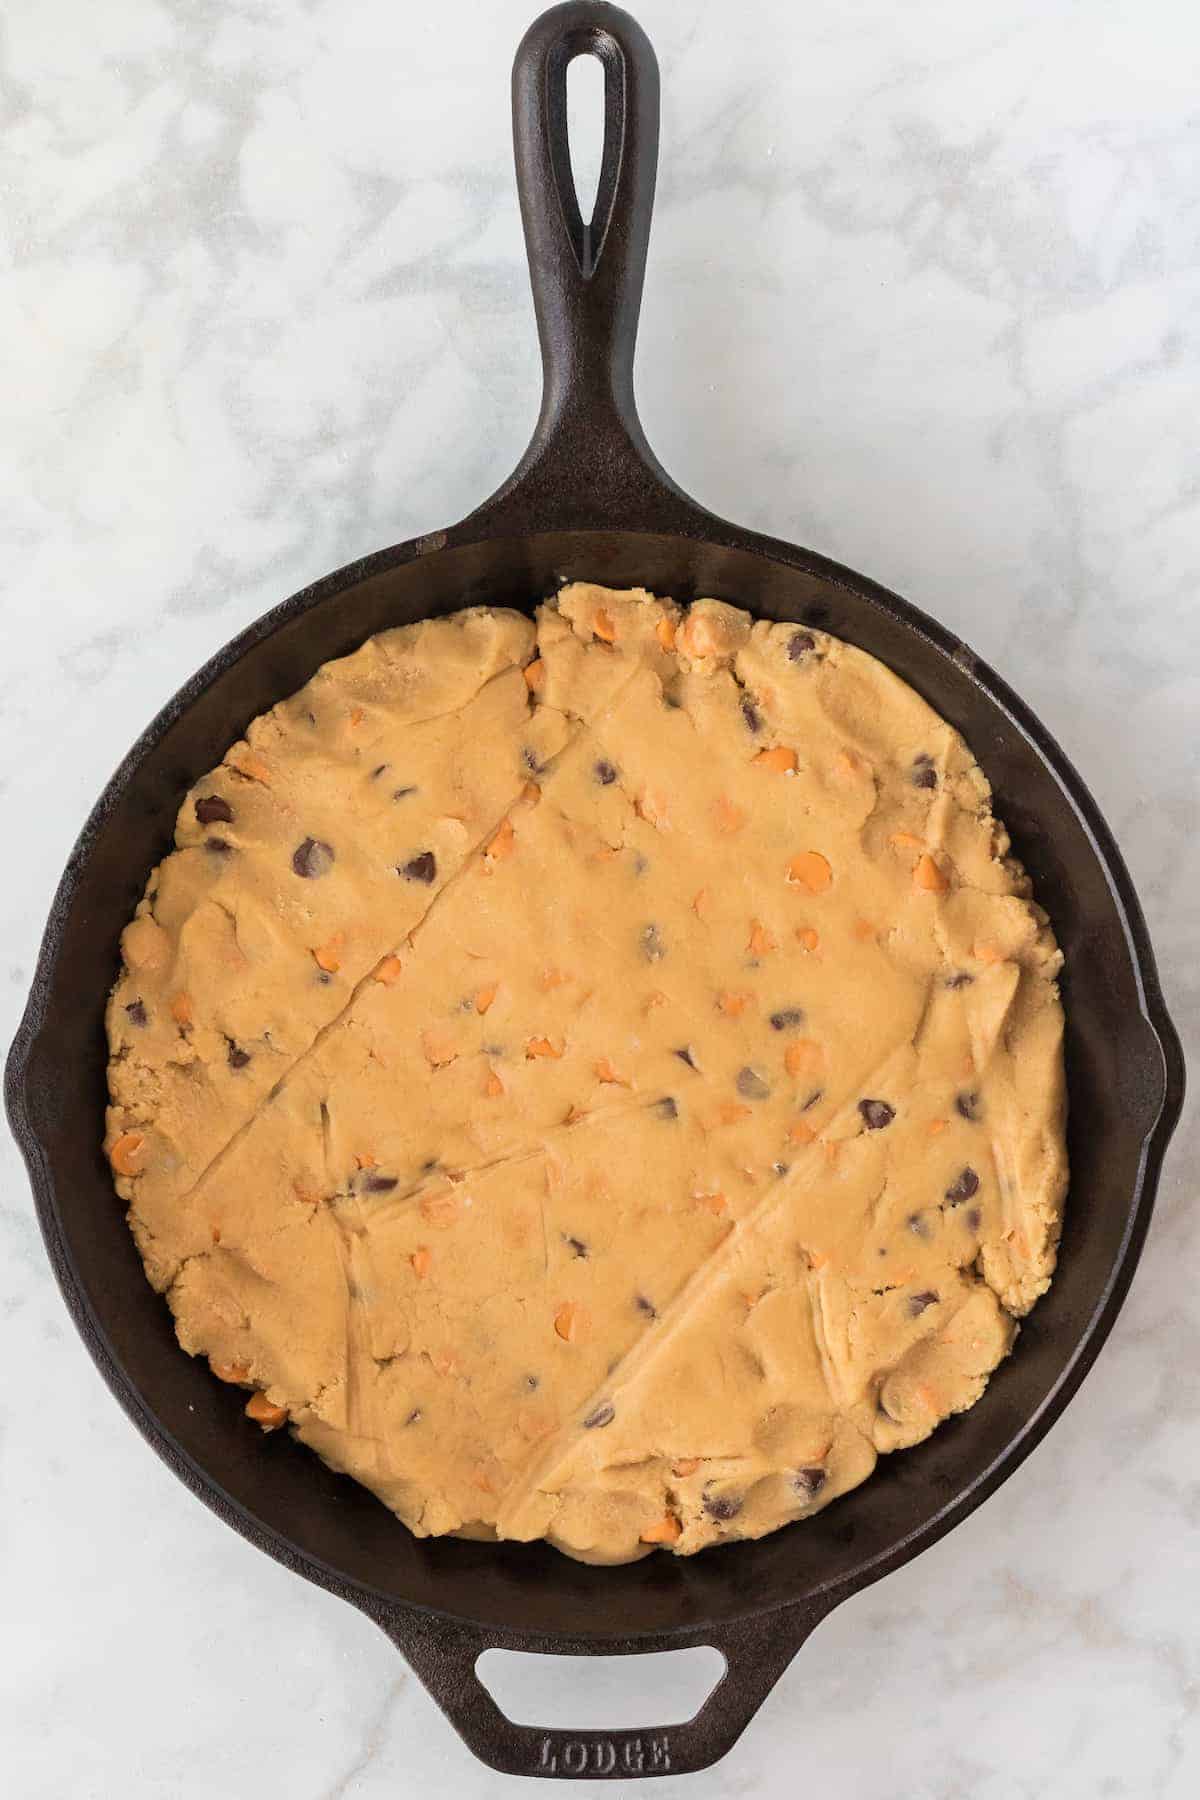 the cookie dough added to the cast iron skillet